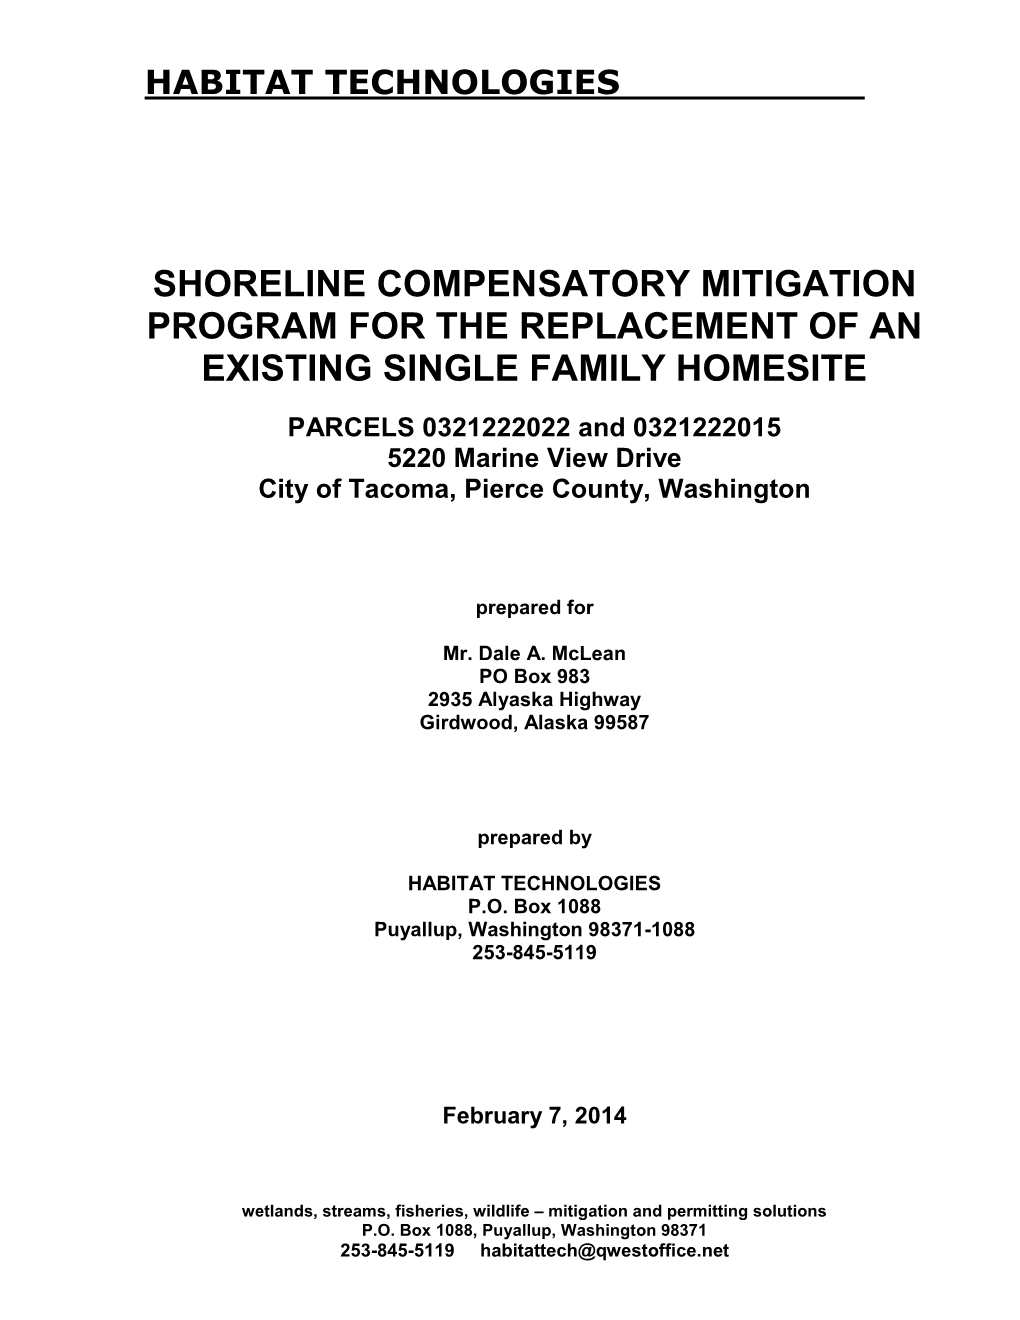 Shoreline Compensatory Mitigation Program for the Replacement of an Existing Single Family Homesite